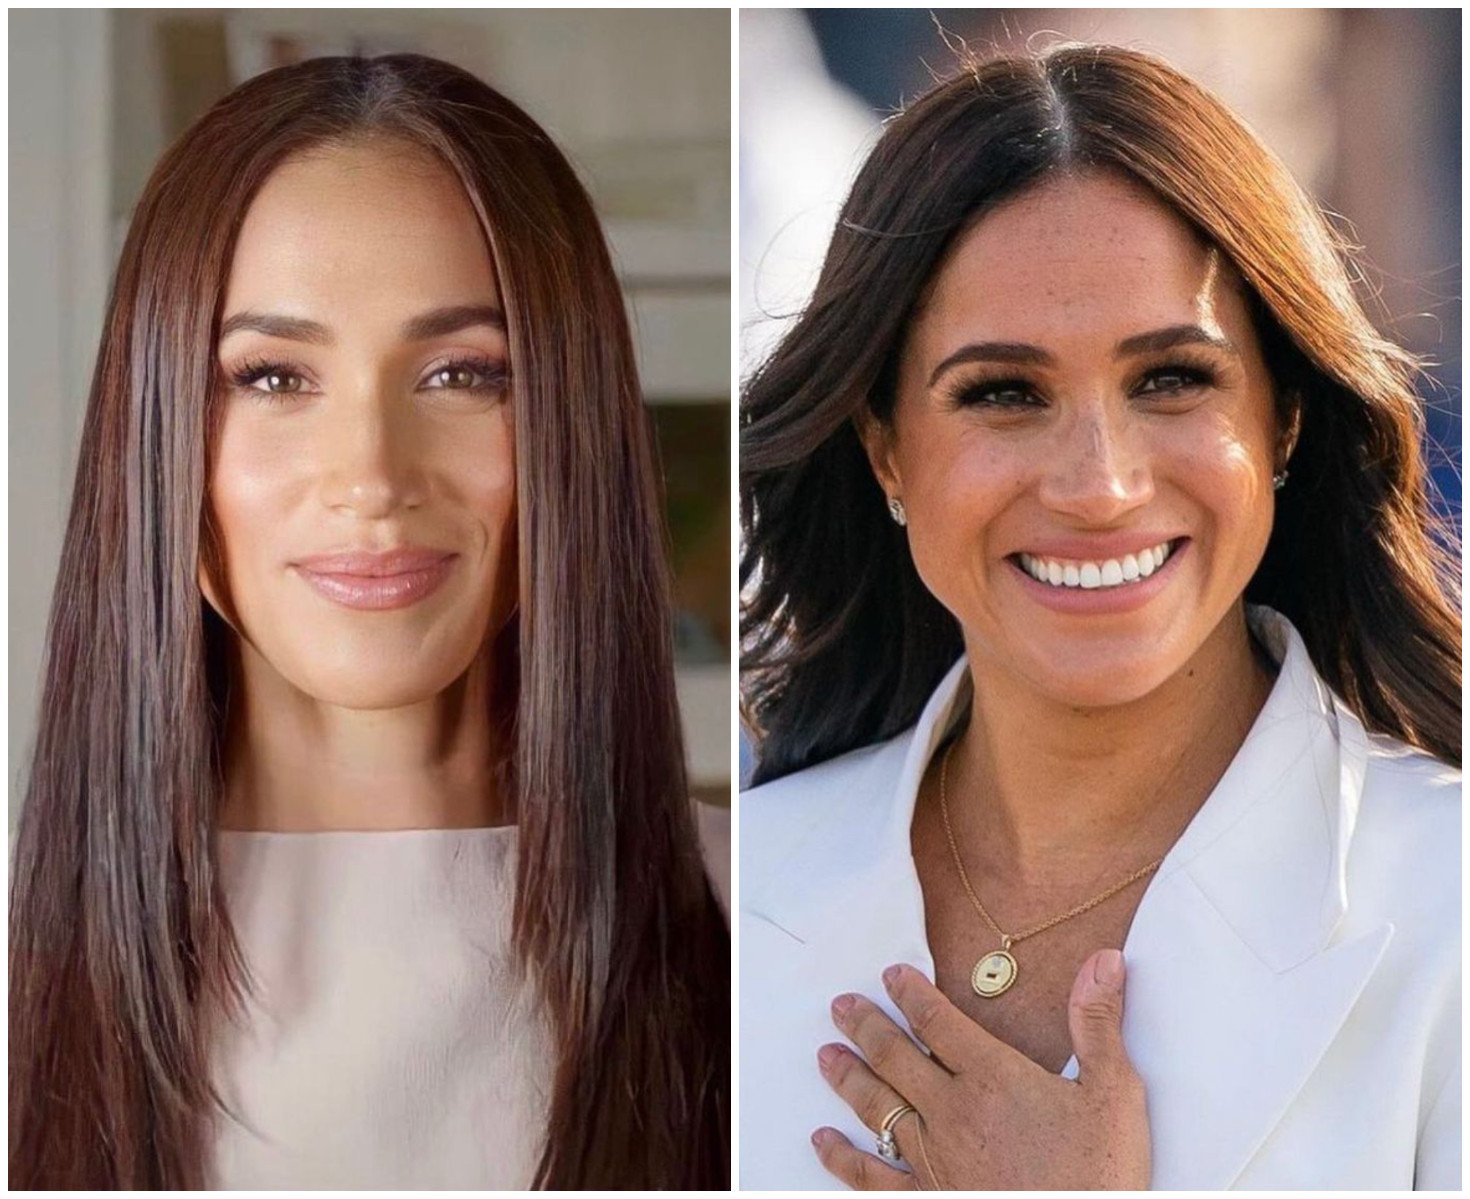 Meghan Markle has resurfaced with an ultra sleek new look. Photos: @about_meghanmarkle, @meghan_markle_page/Instagram